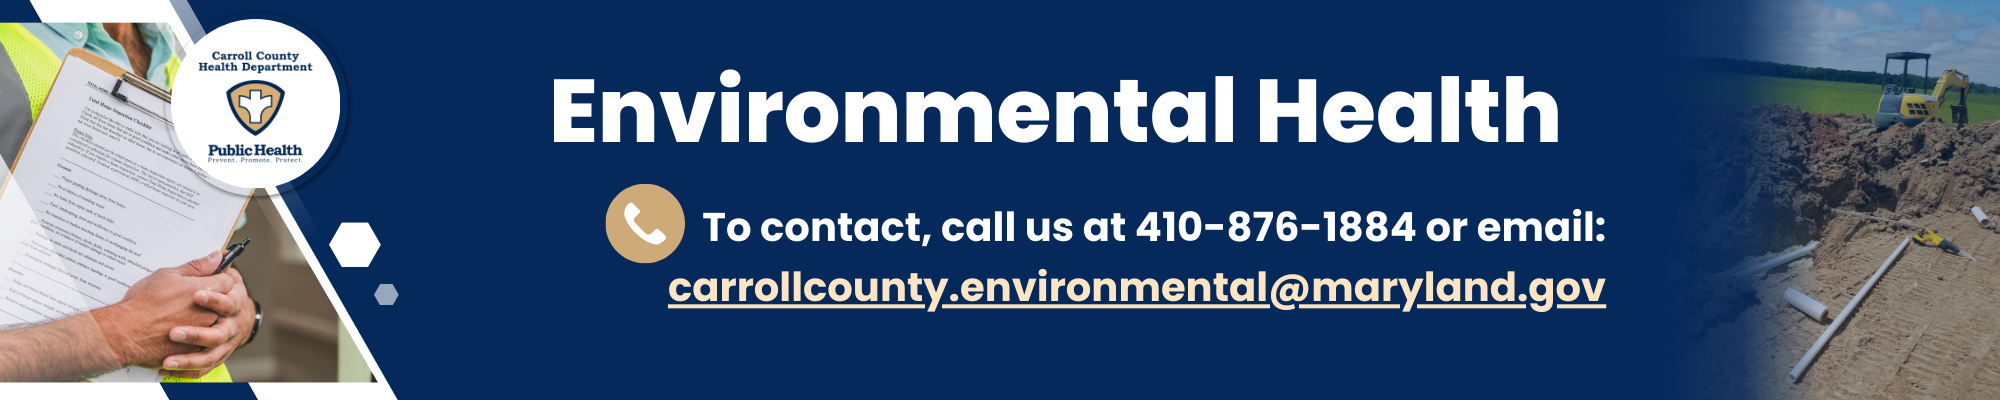 Environmental health program banner. Contact information and images of field work.